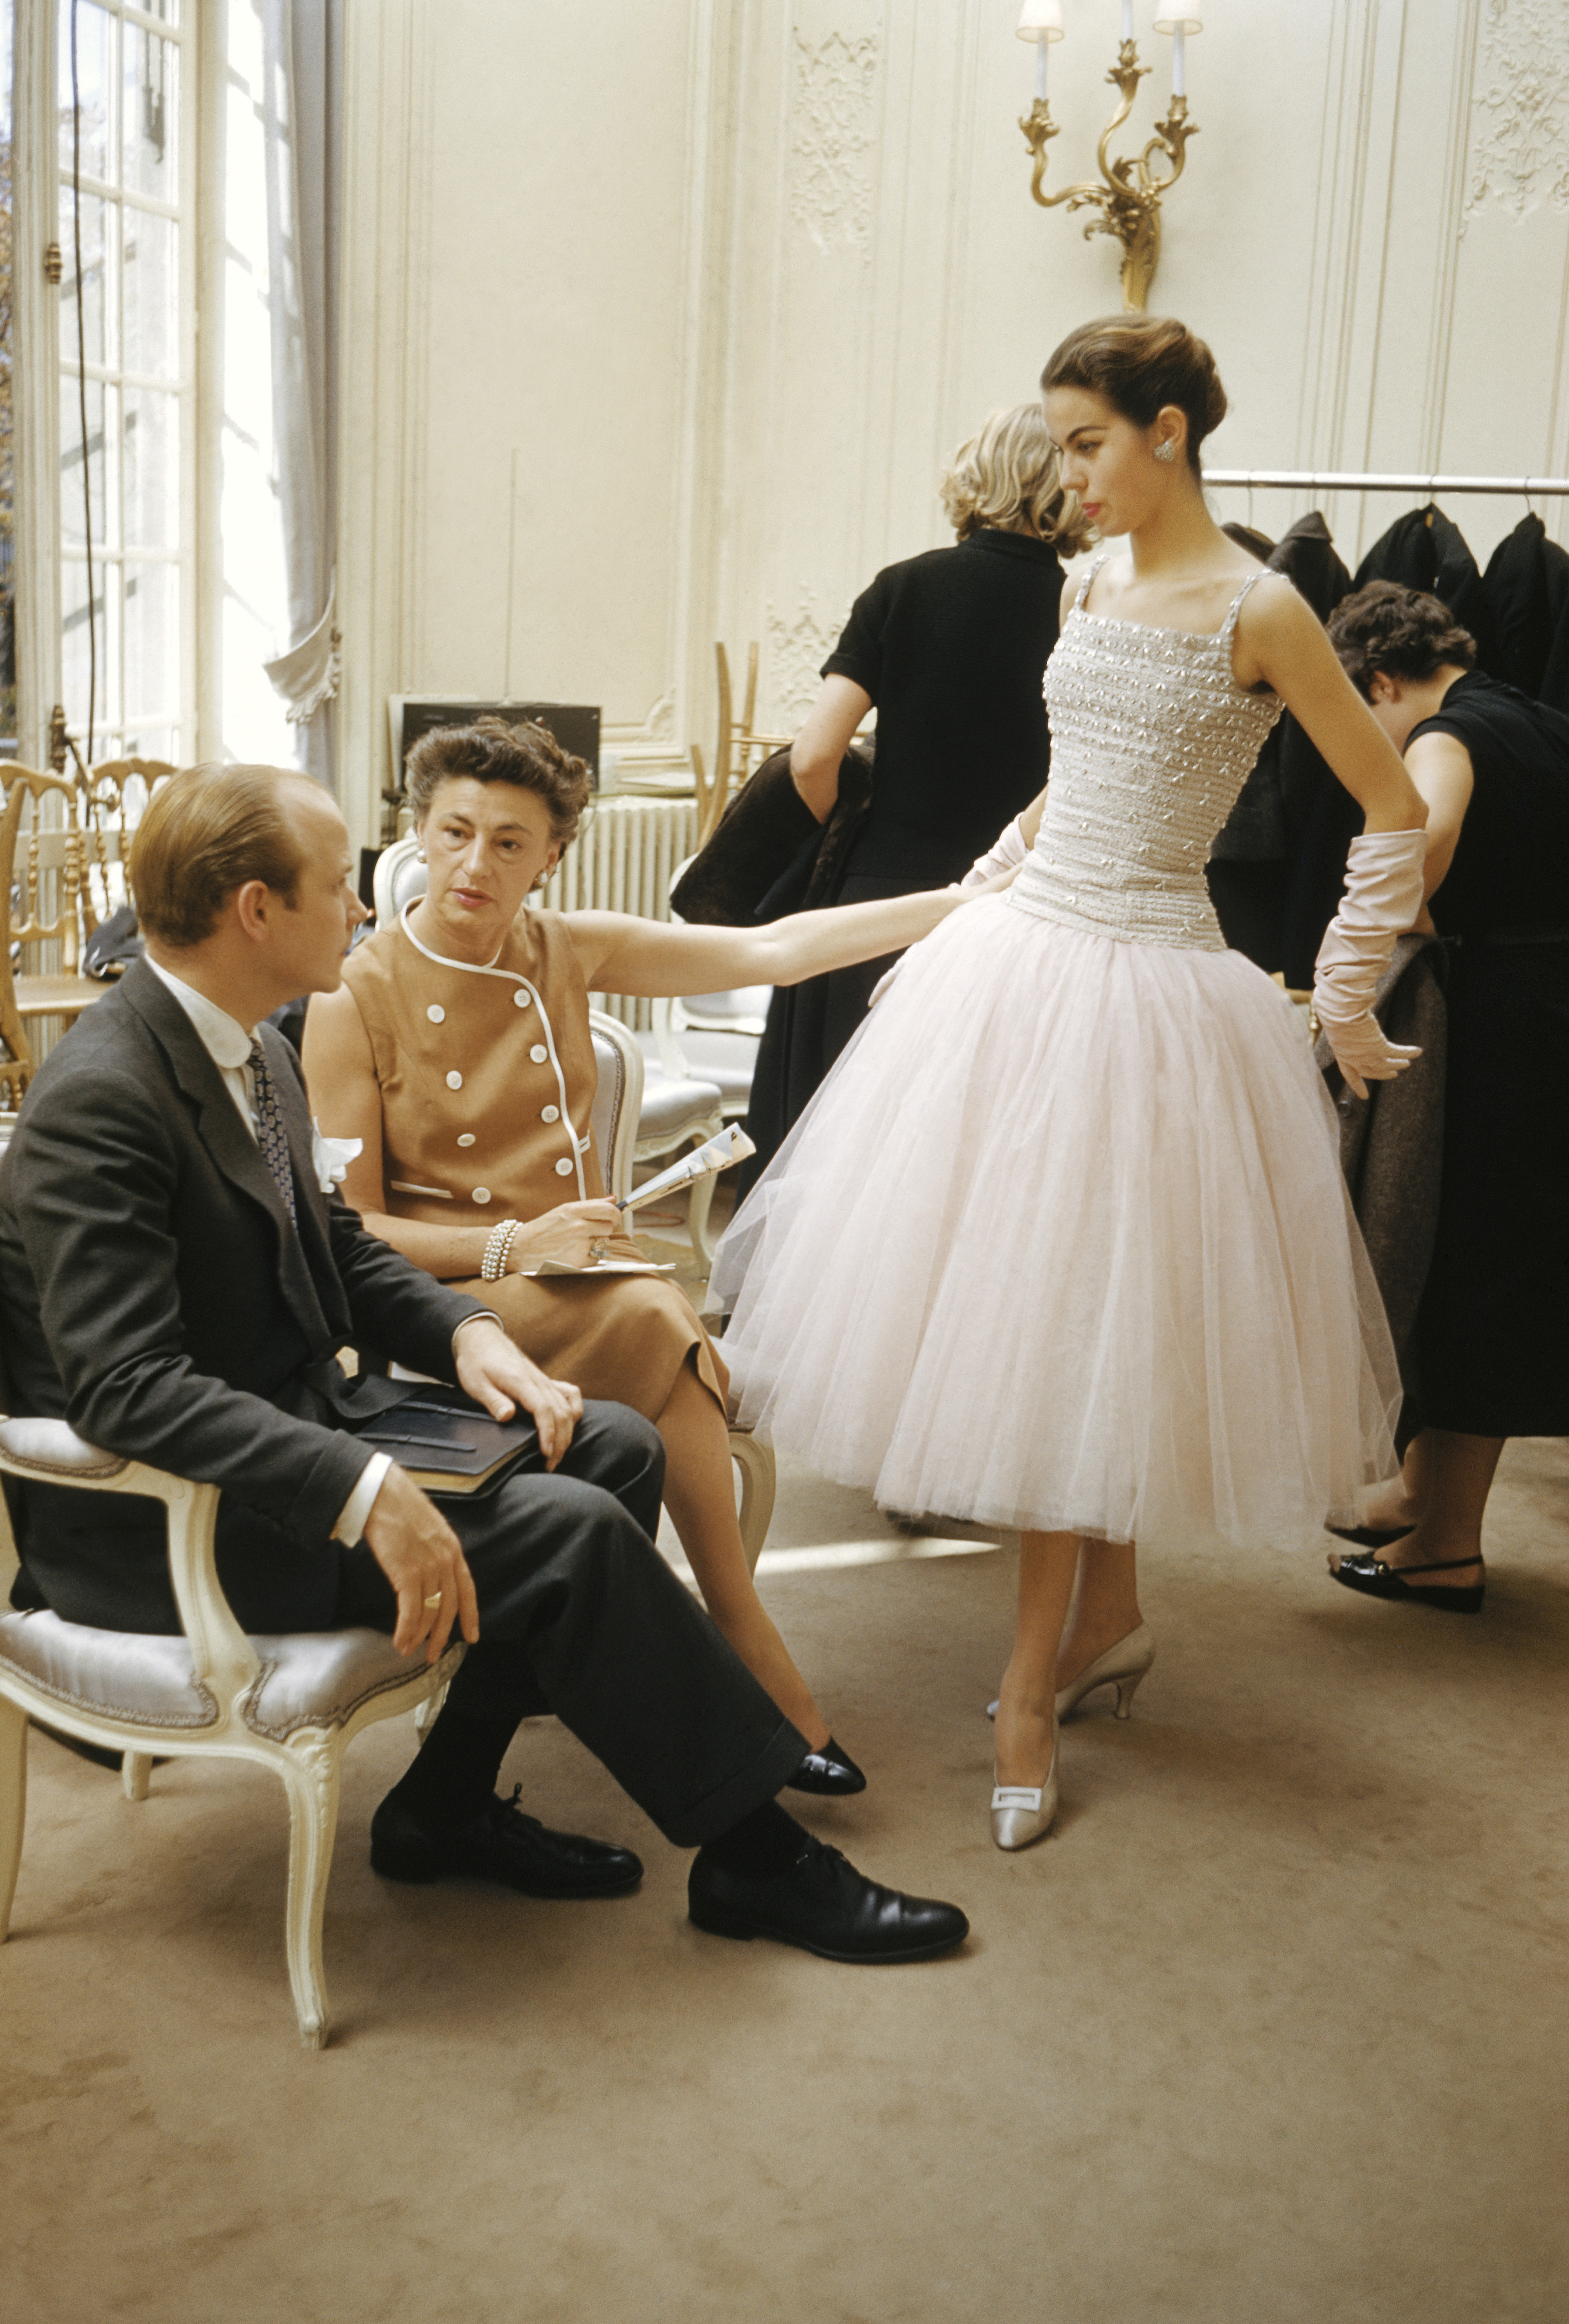 Why Christian Dior's Couture is Canon - History of Dior's Couture